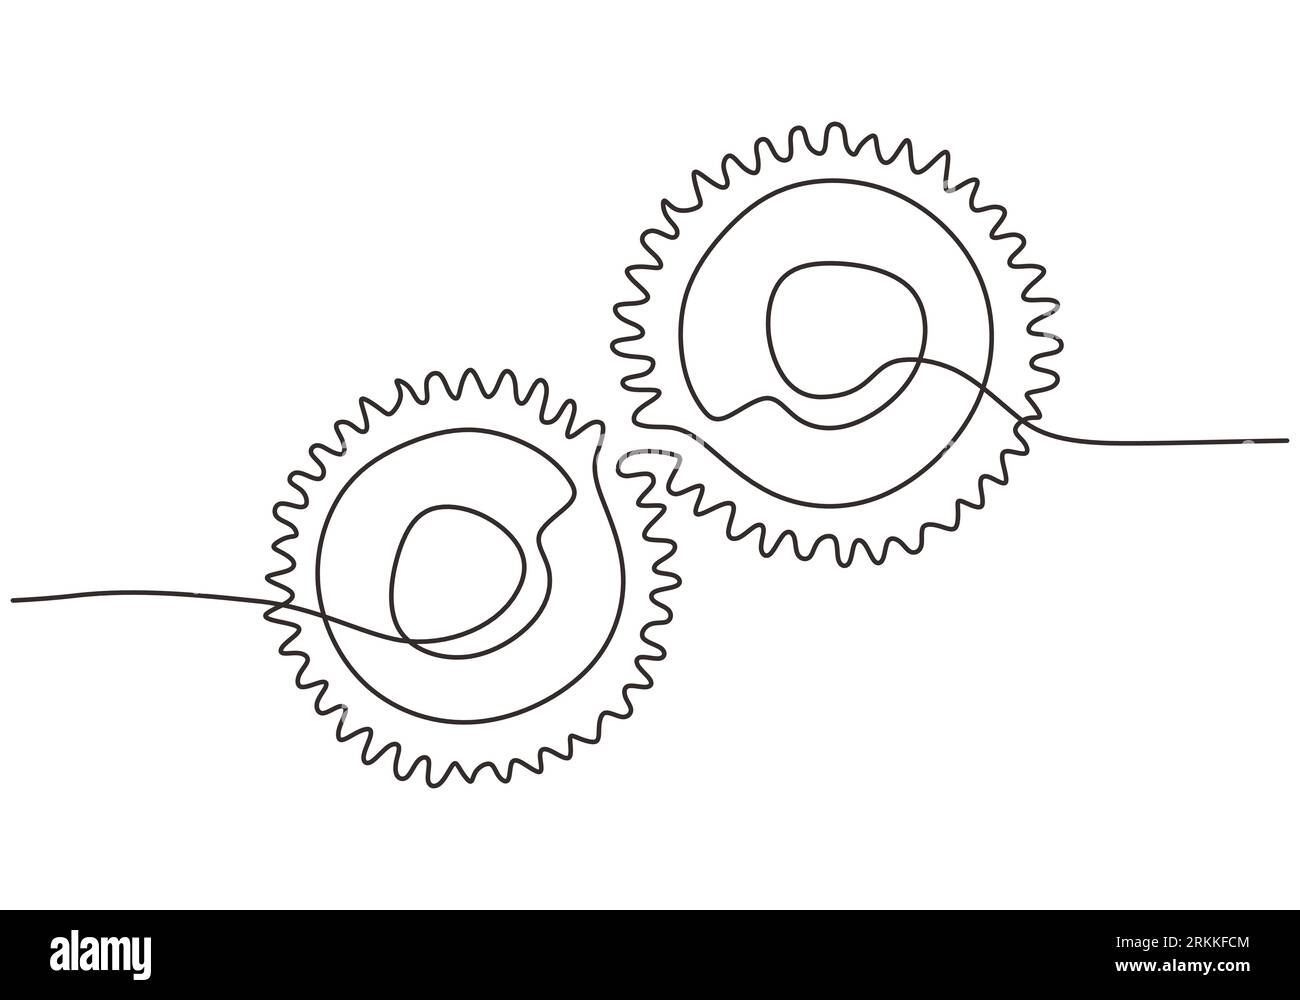 Moving gears wheels in continuous line drawing minimalist design. Round wheel metal symbol company logotype template for business teamwork concept lin Stock Vector